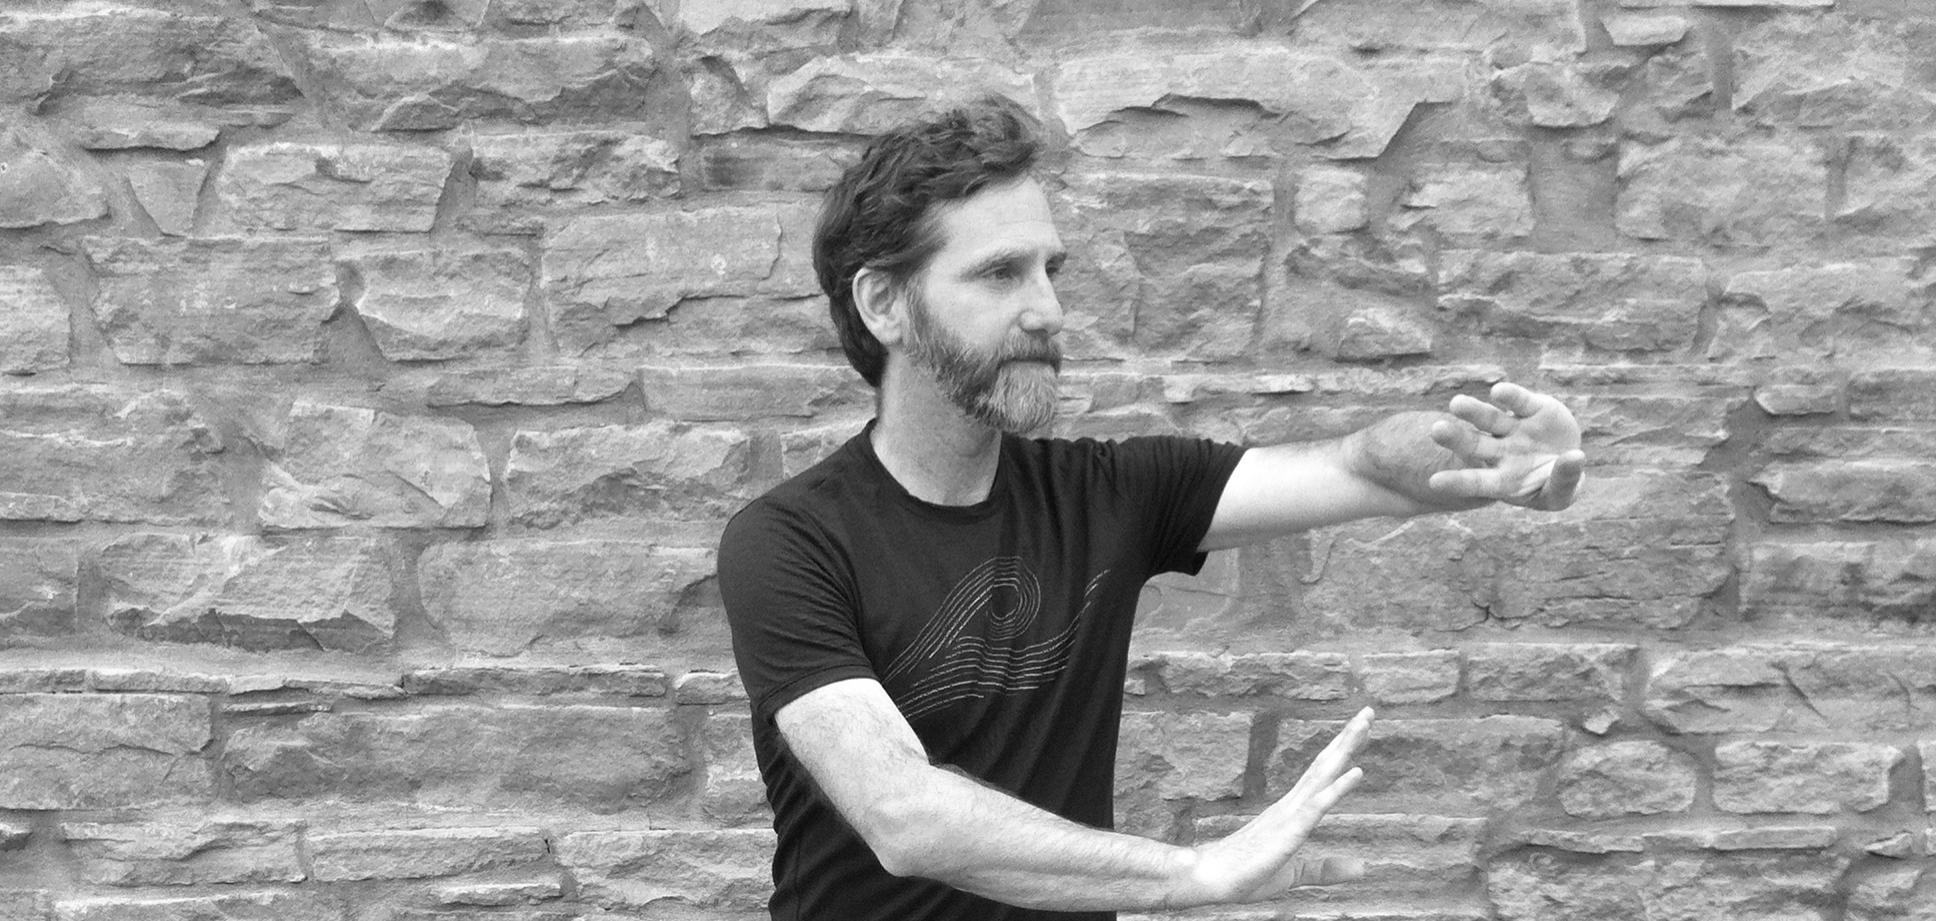 Tai Chi blogger Scott P. Phillipps from Weakness with a Twist